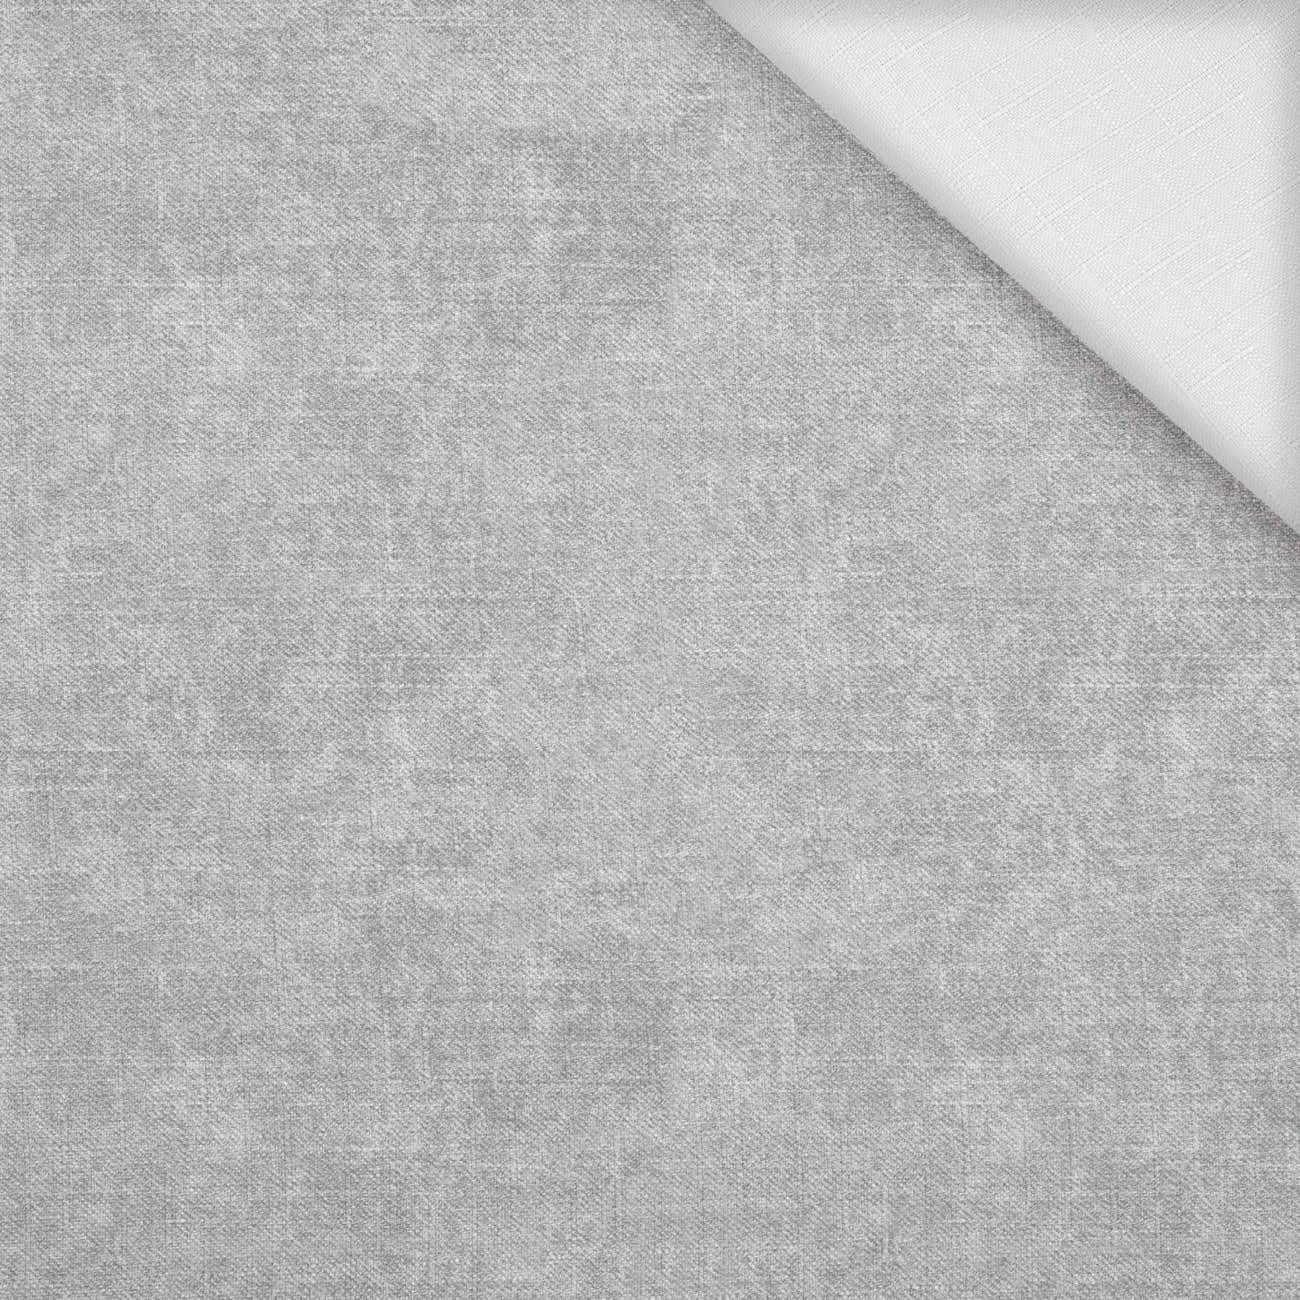 ACID WASH / LIGHT GRAY - Woven Fabric for tablecloths